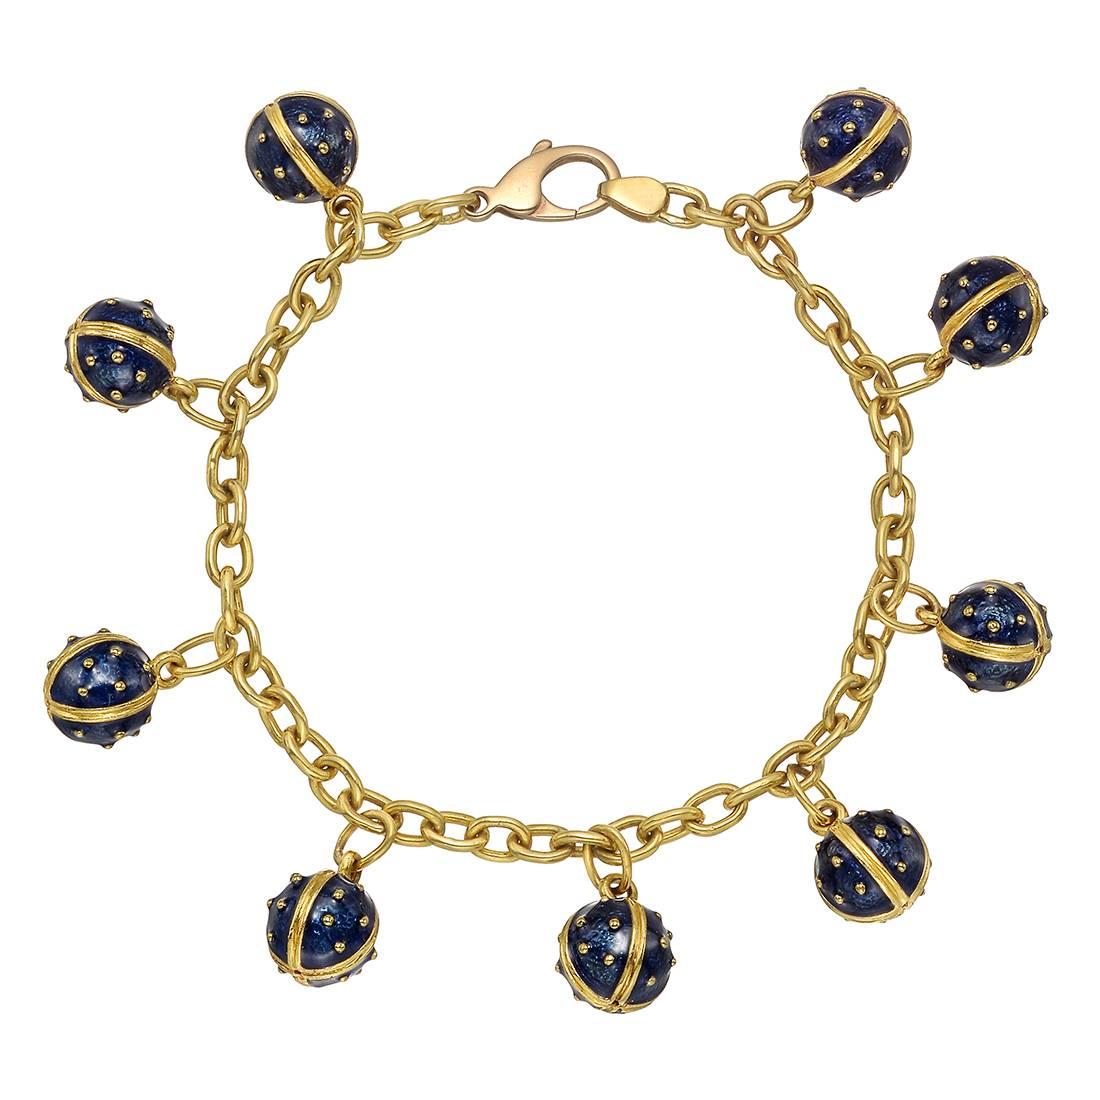 Gold charm bracelet, set with nine navy blue enamel ball charms with dots and lines, in 14k yellow gold. Each charm measuring 0.4